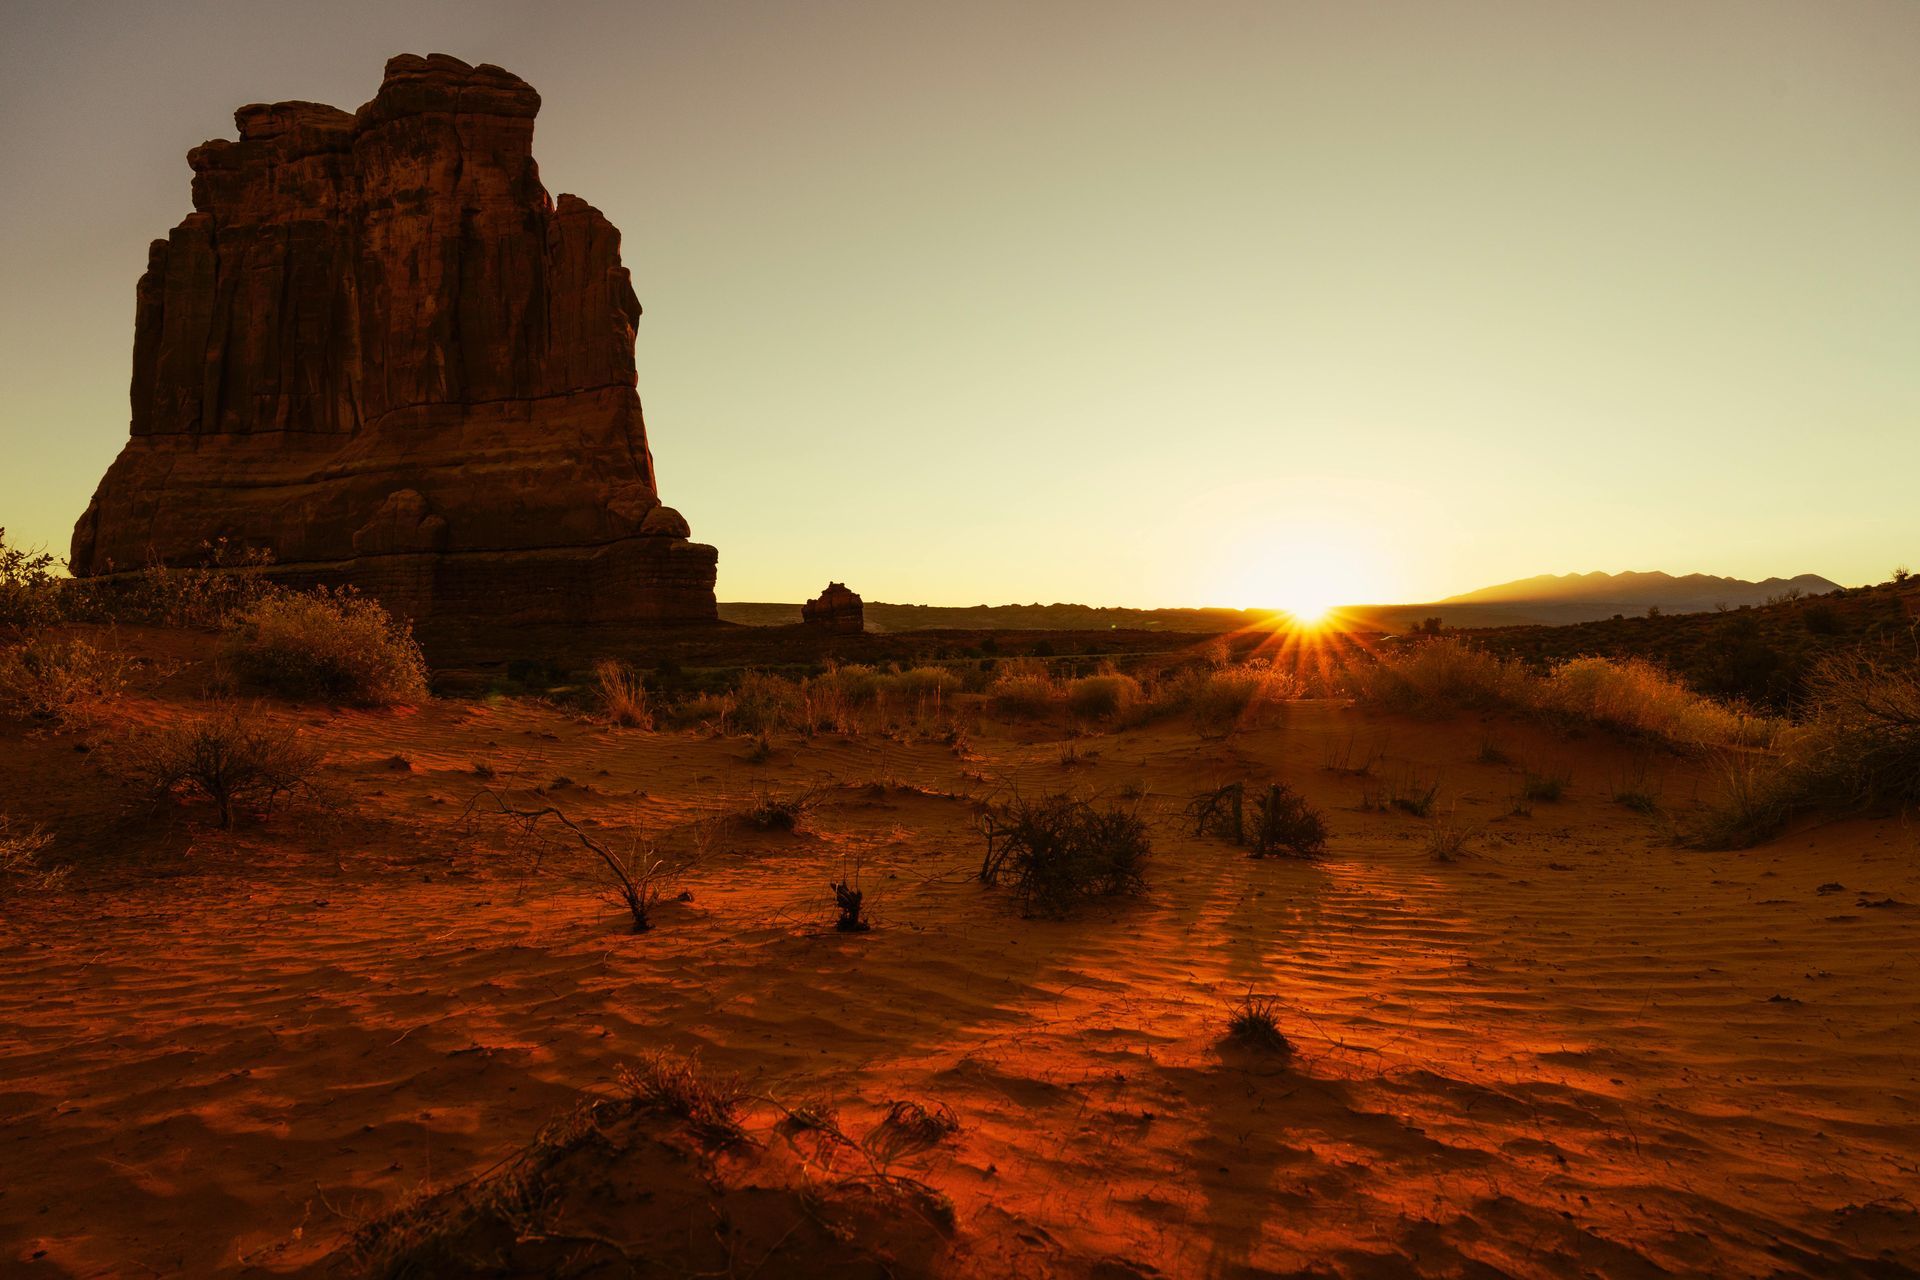 The sun is setting over a desert landscape with a large rock formation in the background.